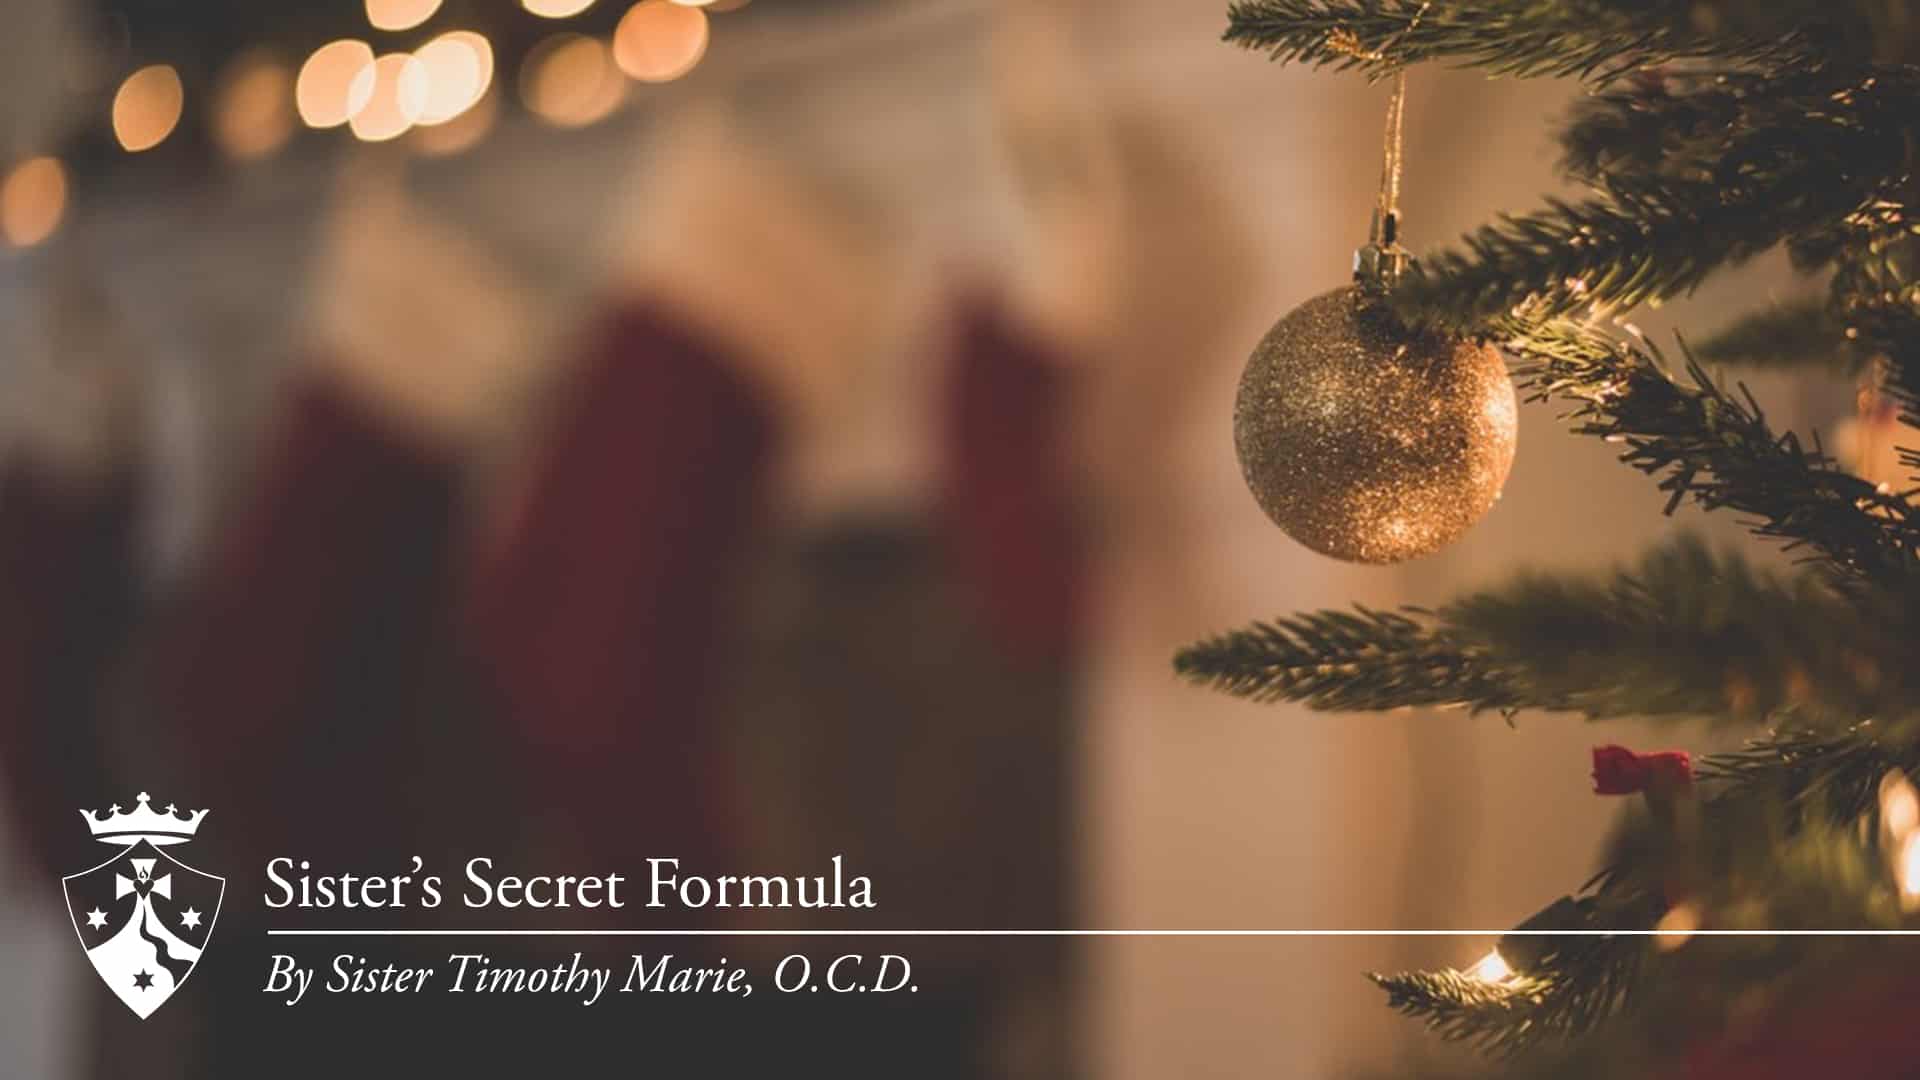 Christmas tree and stockings, 'Sister's Secret Formula, By Sister Timothy Marie, O.C.D.'